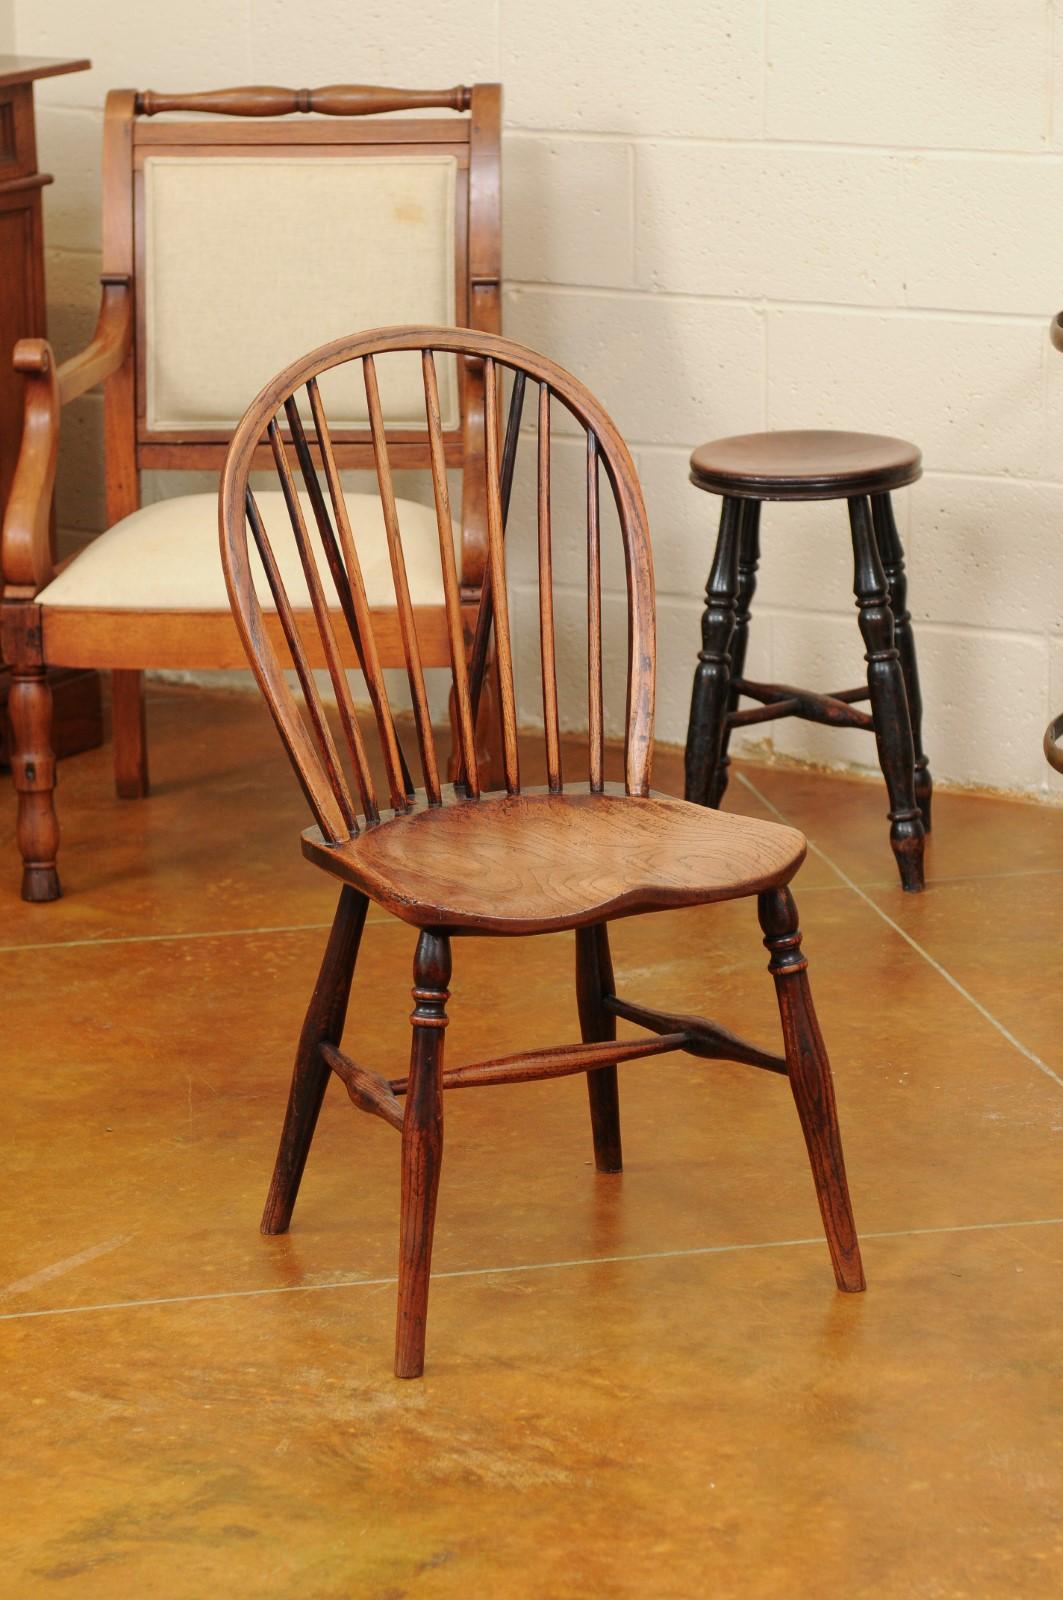 Petite oak Windsor chair with spindle back and turned legs & stretcher, England circa 1890.